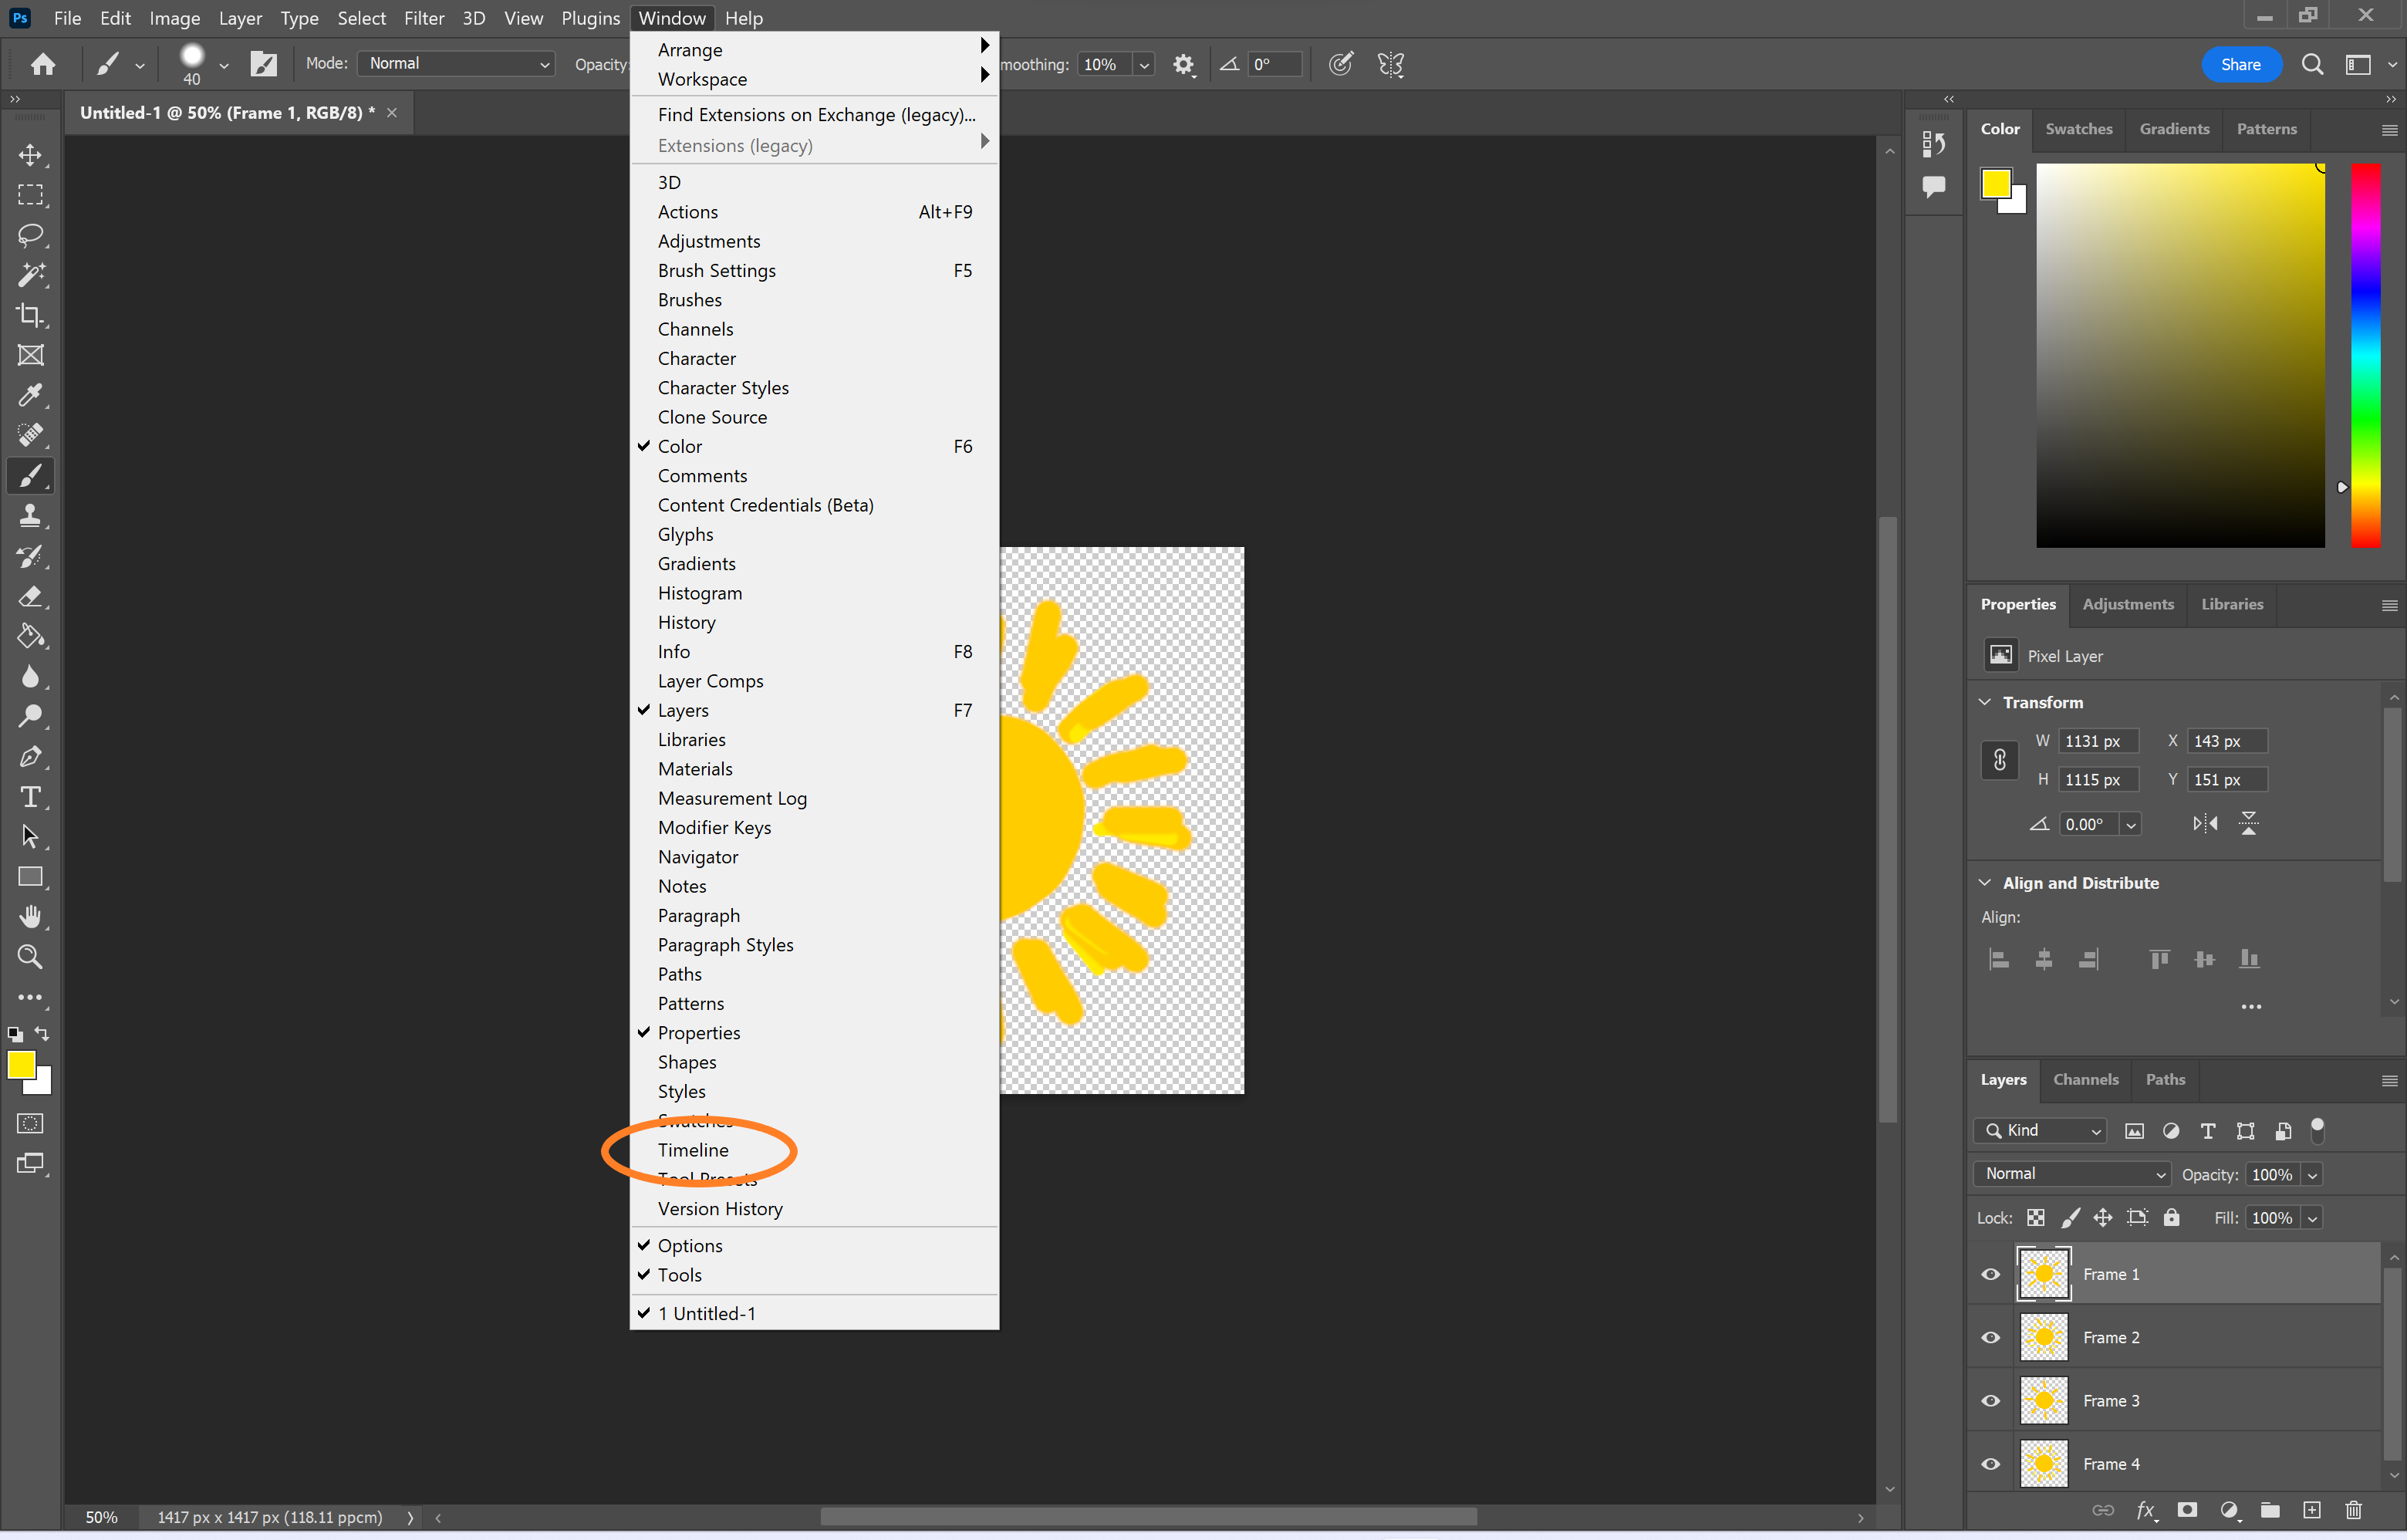 How to create a GIF in Photoshop